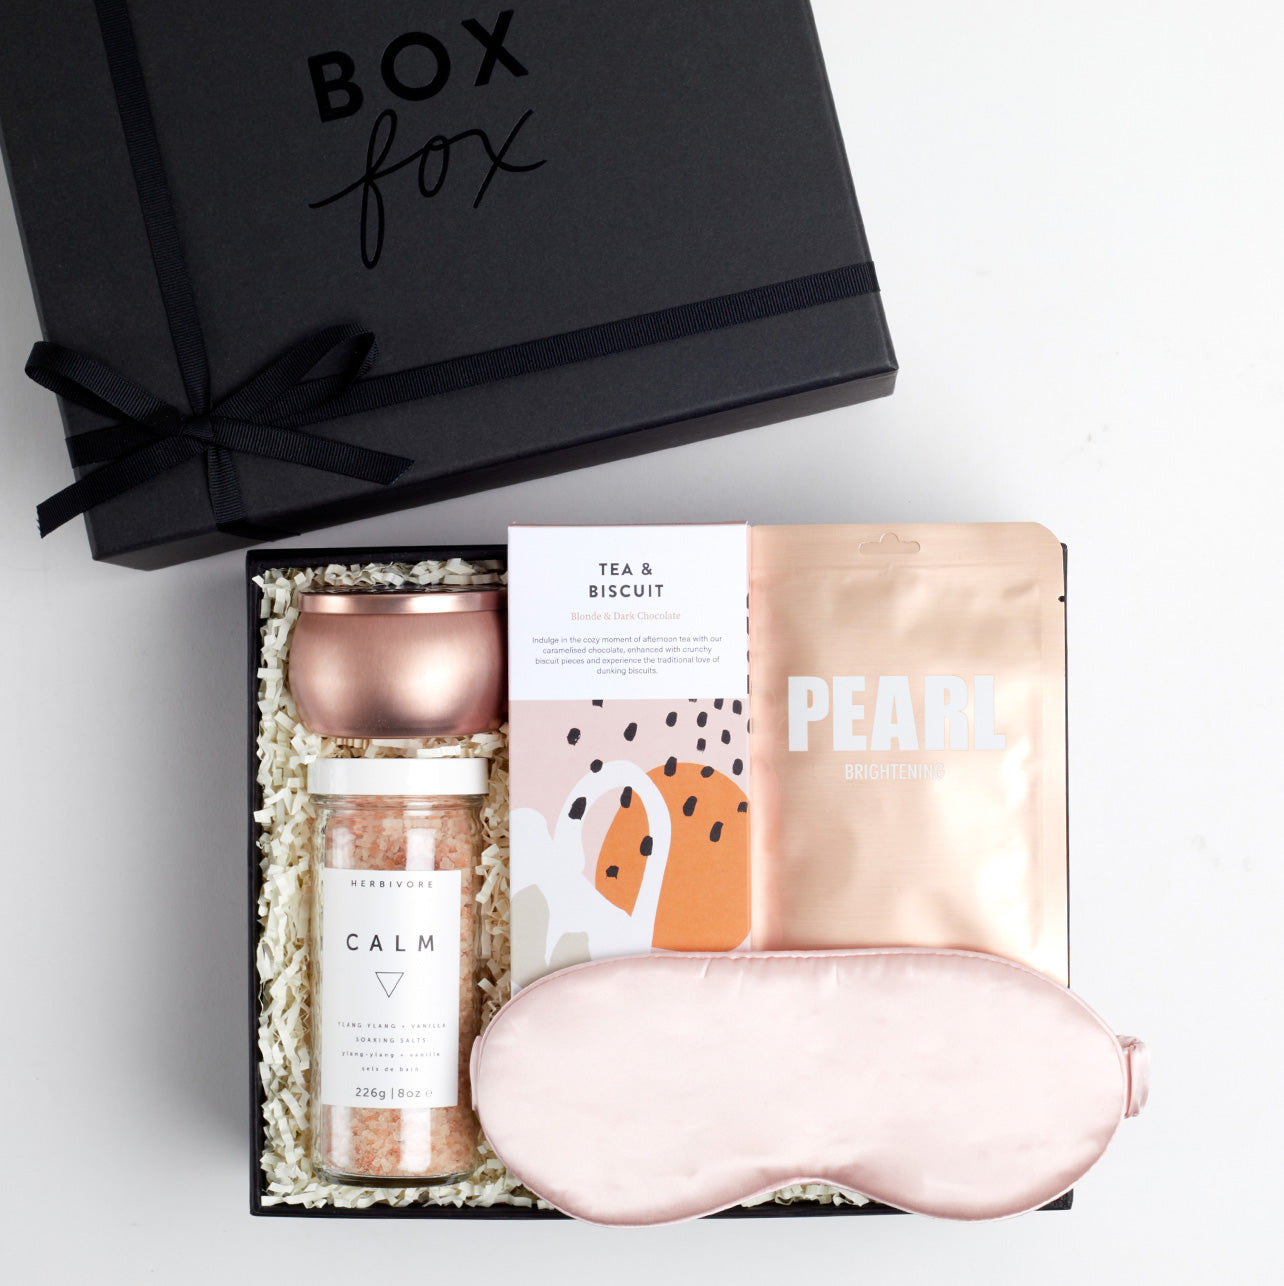 BOXFOX Black Gift Box filled with Azeria Pink Silk Sleep Mask, Herbivore Botanicals Calm Bath Salts, Voluspa Prosecco Rose Candle, Lapcos Pearl Sheet Mask and The chocolate society chocolate bar